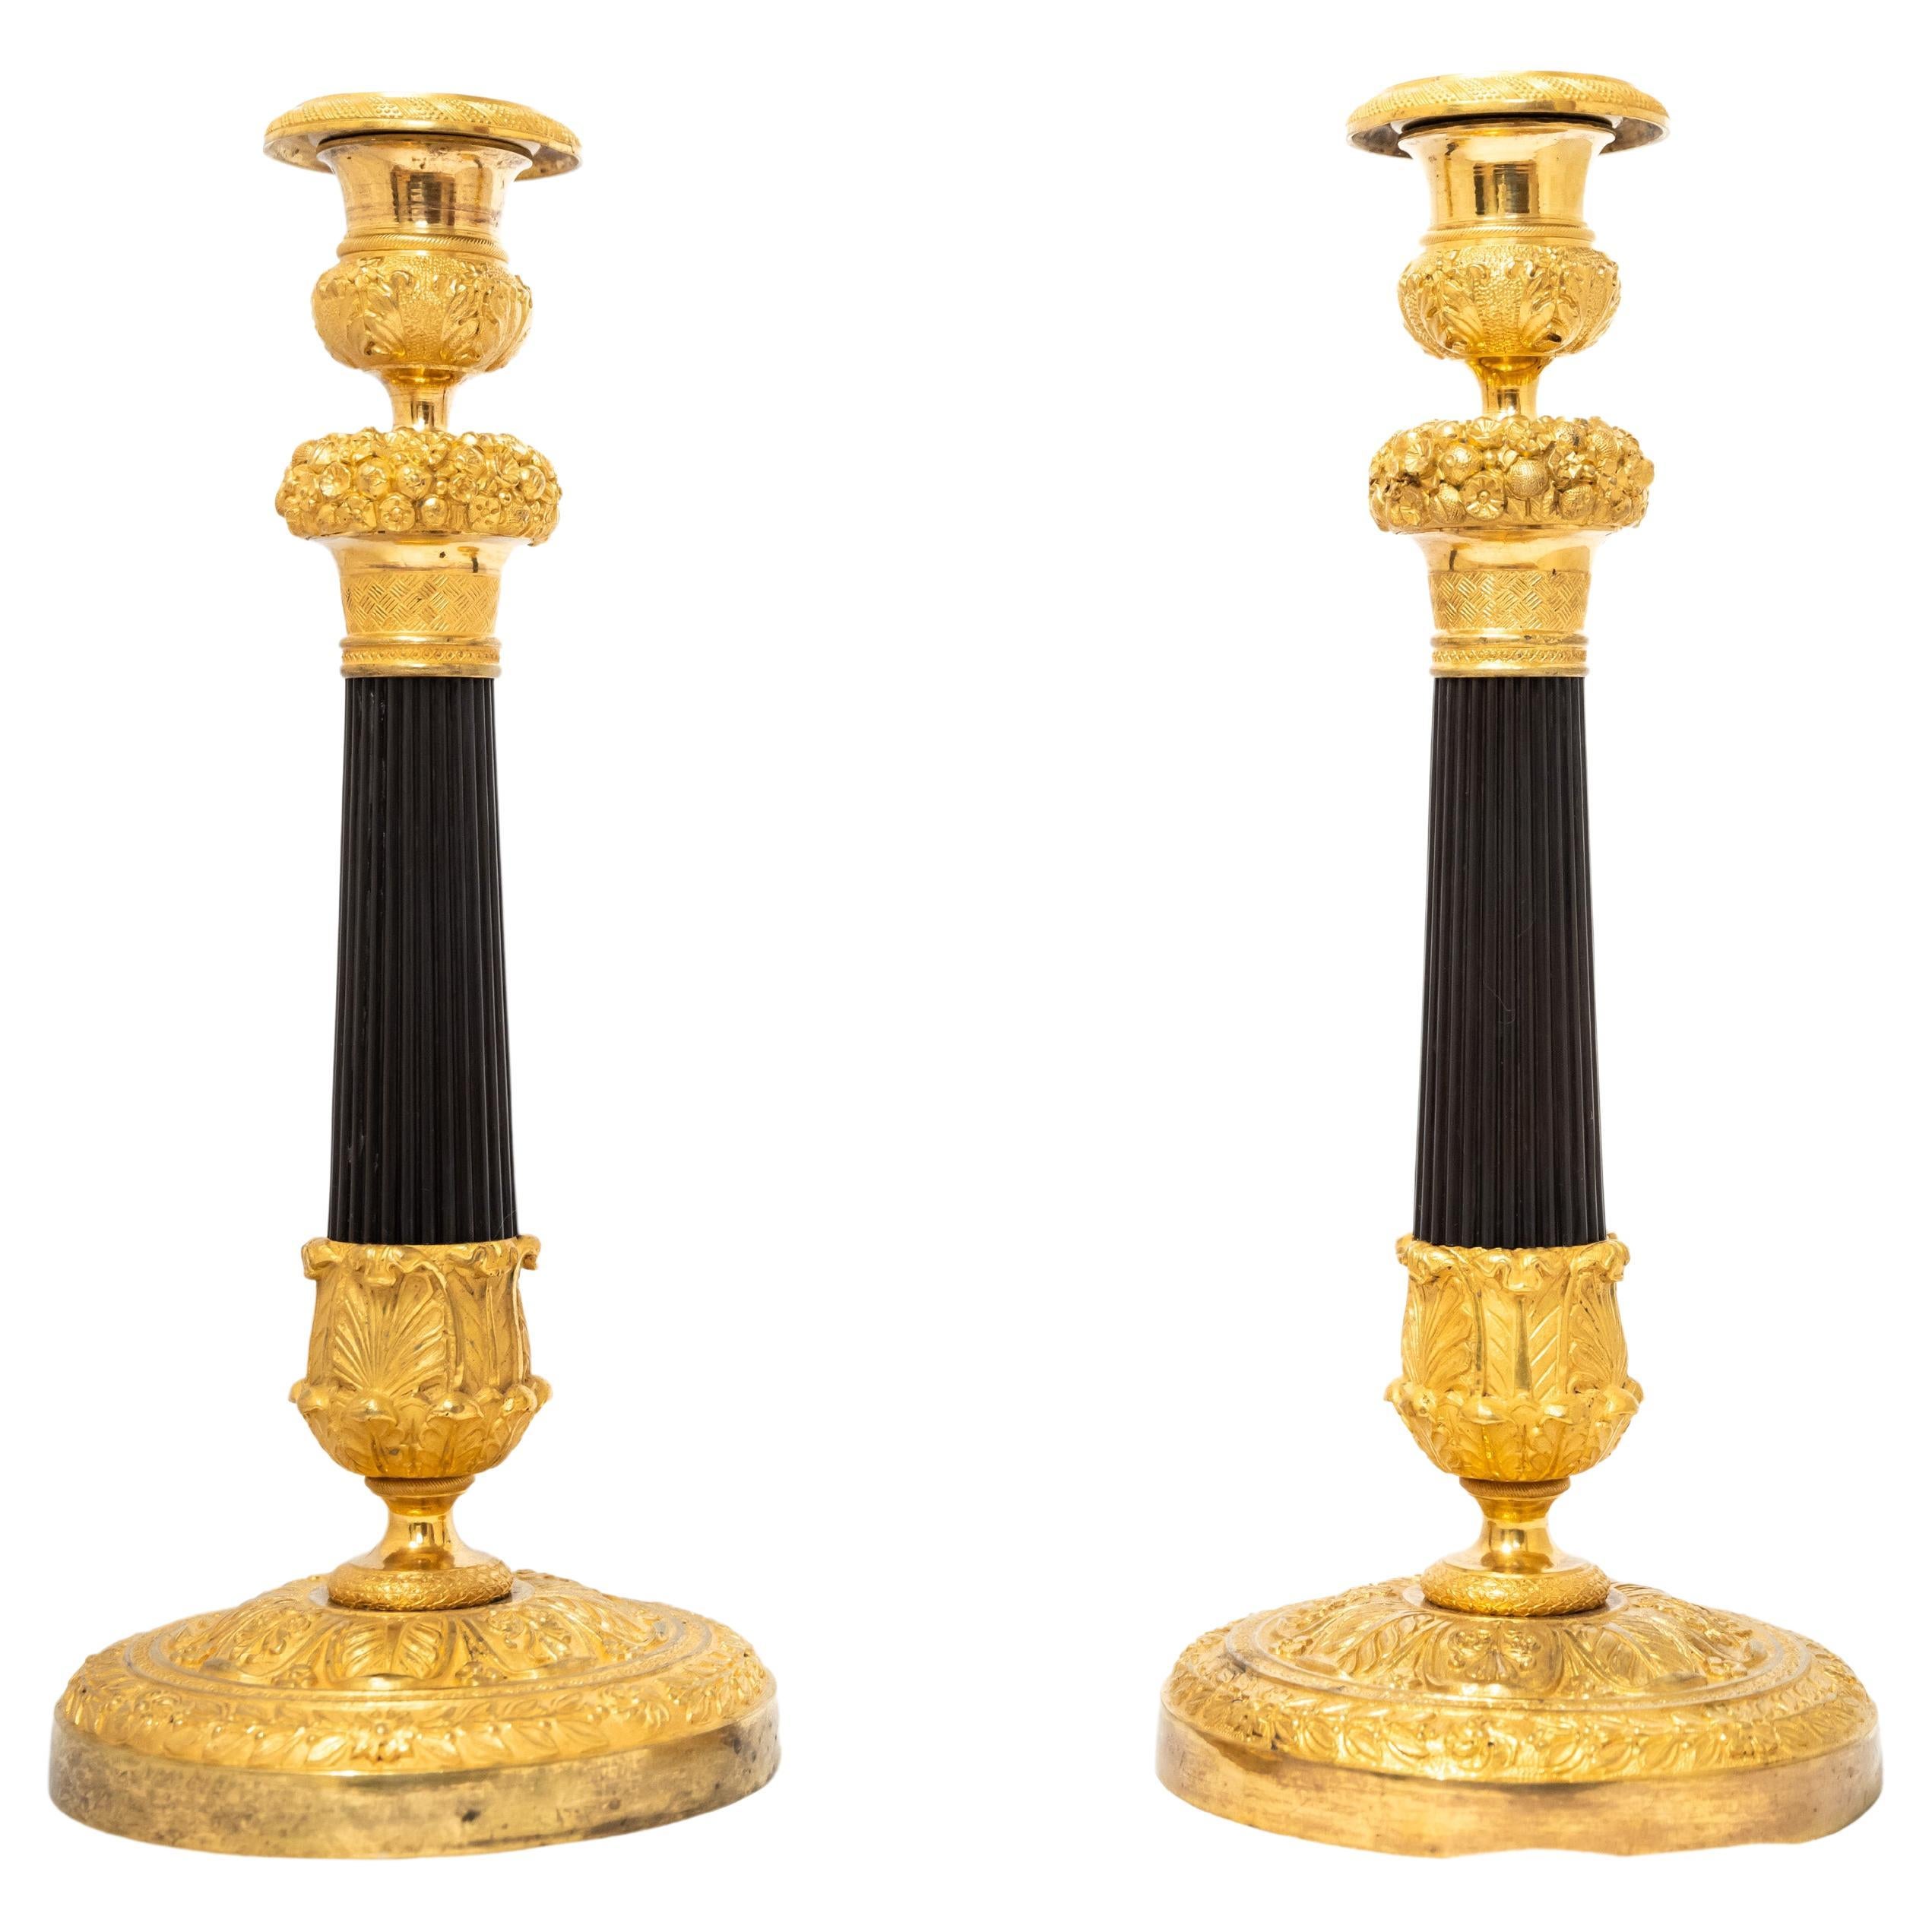 A Pair of Fire-Gilt and Patinated Bronze Candlesticks c. 1815 - 1830